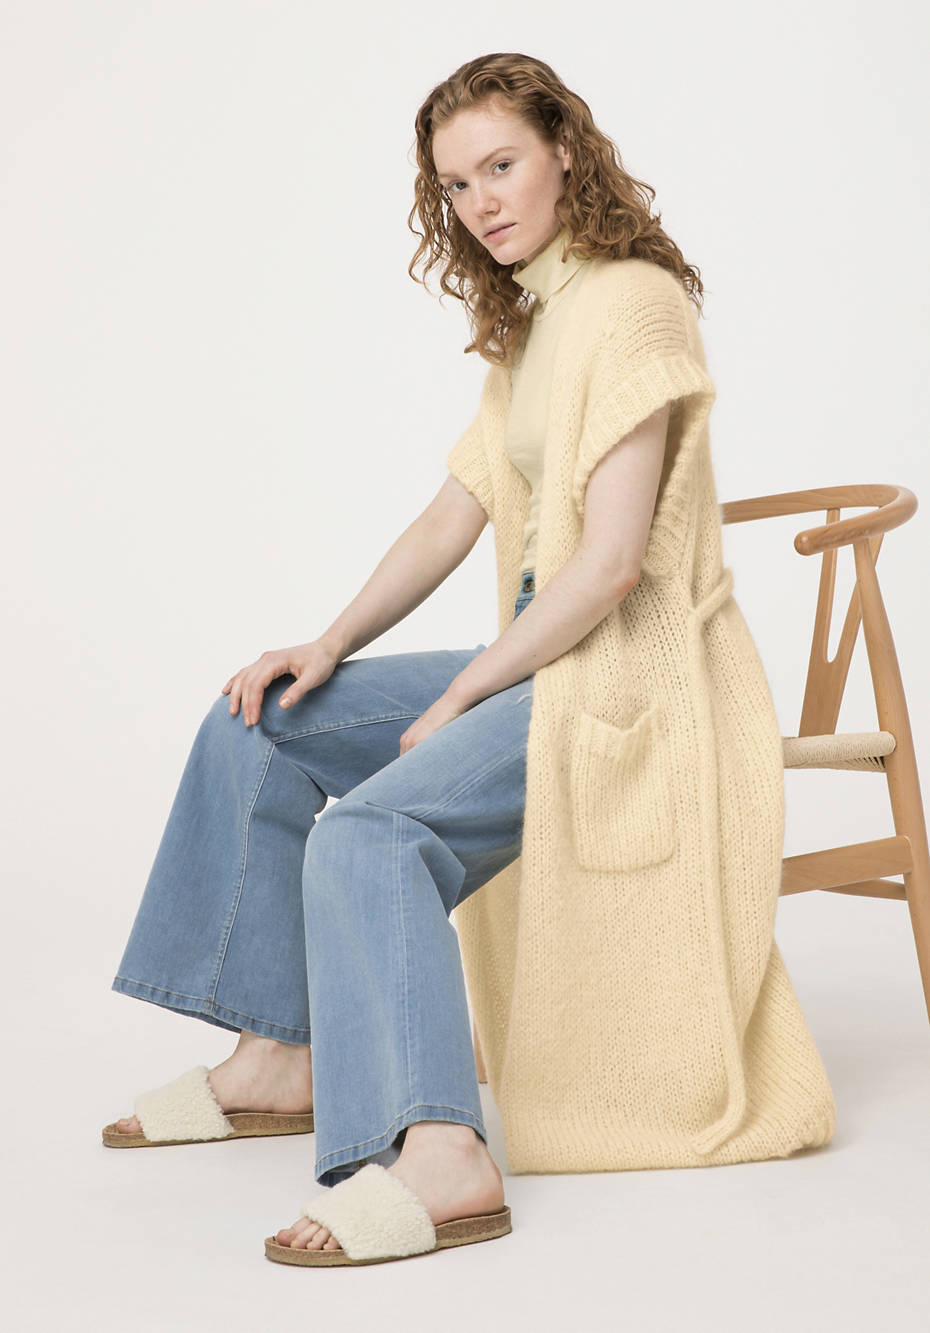 Knit coat made of mohair with virgin wool